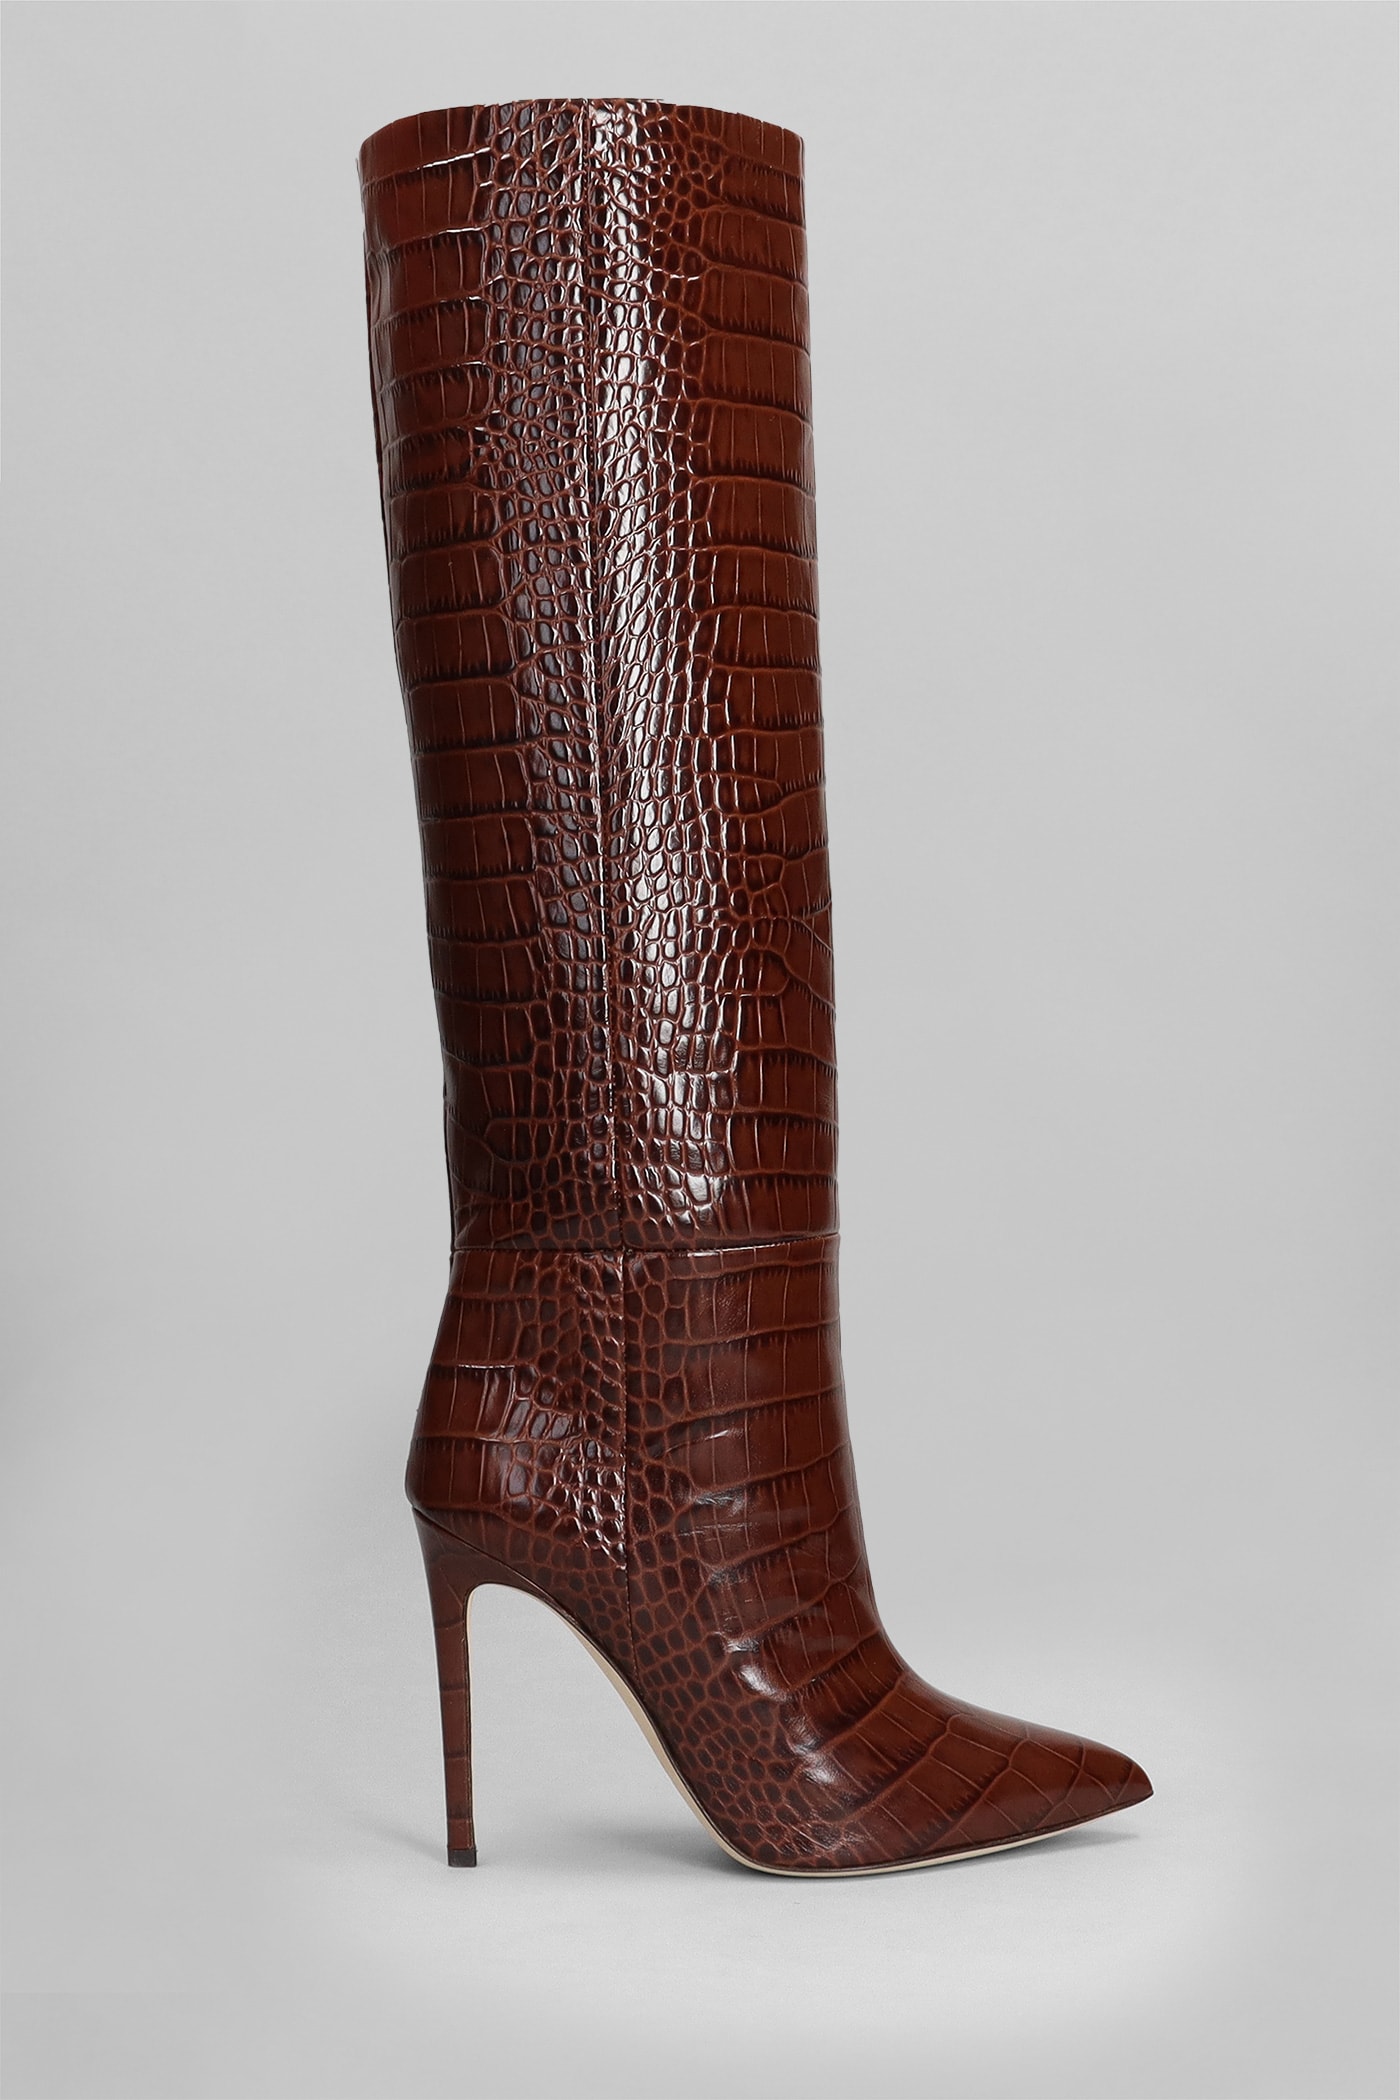 PARIS TEXAS HIGH HEELS BOOTS IN BROWN LEATHER